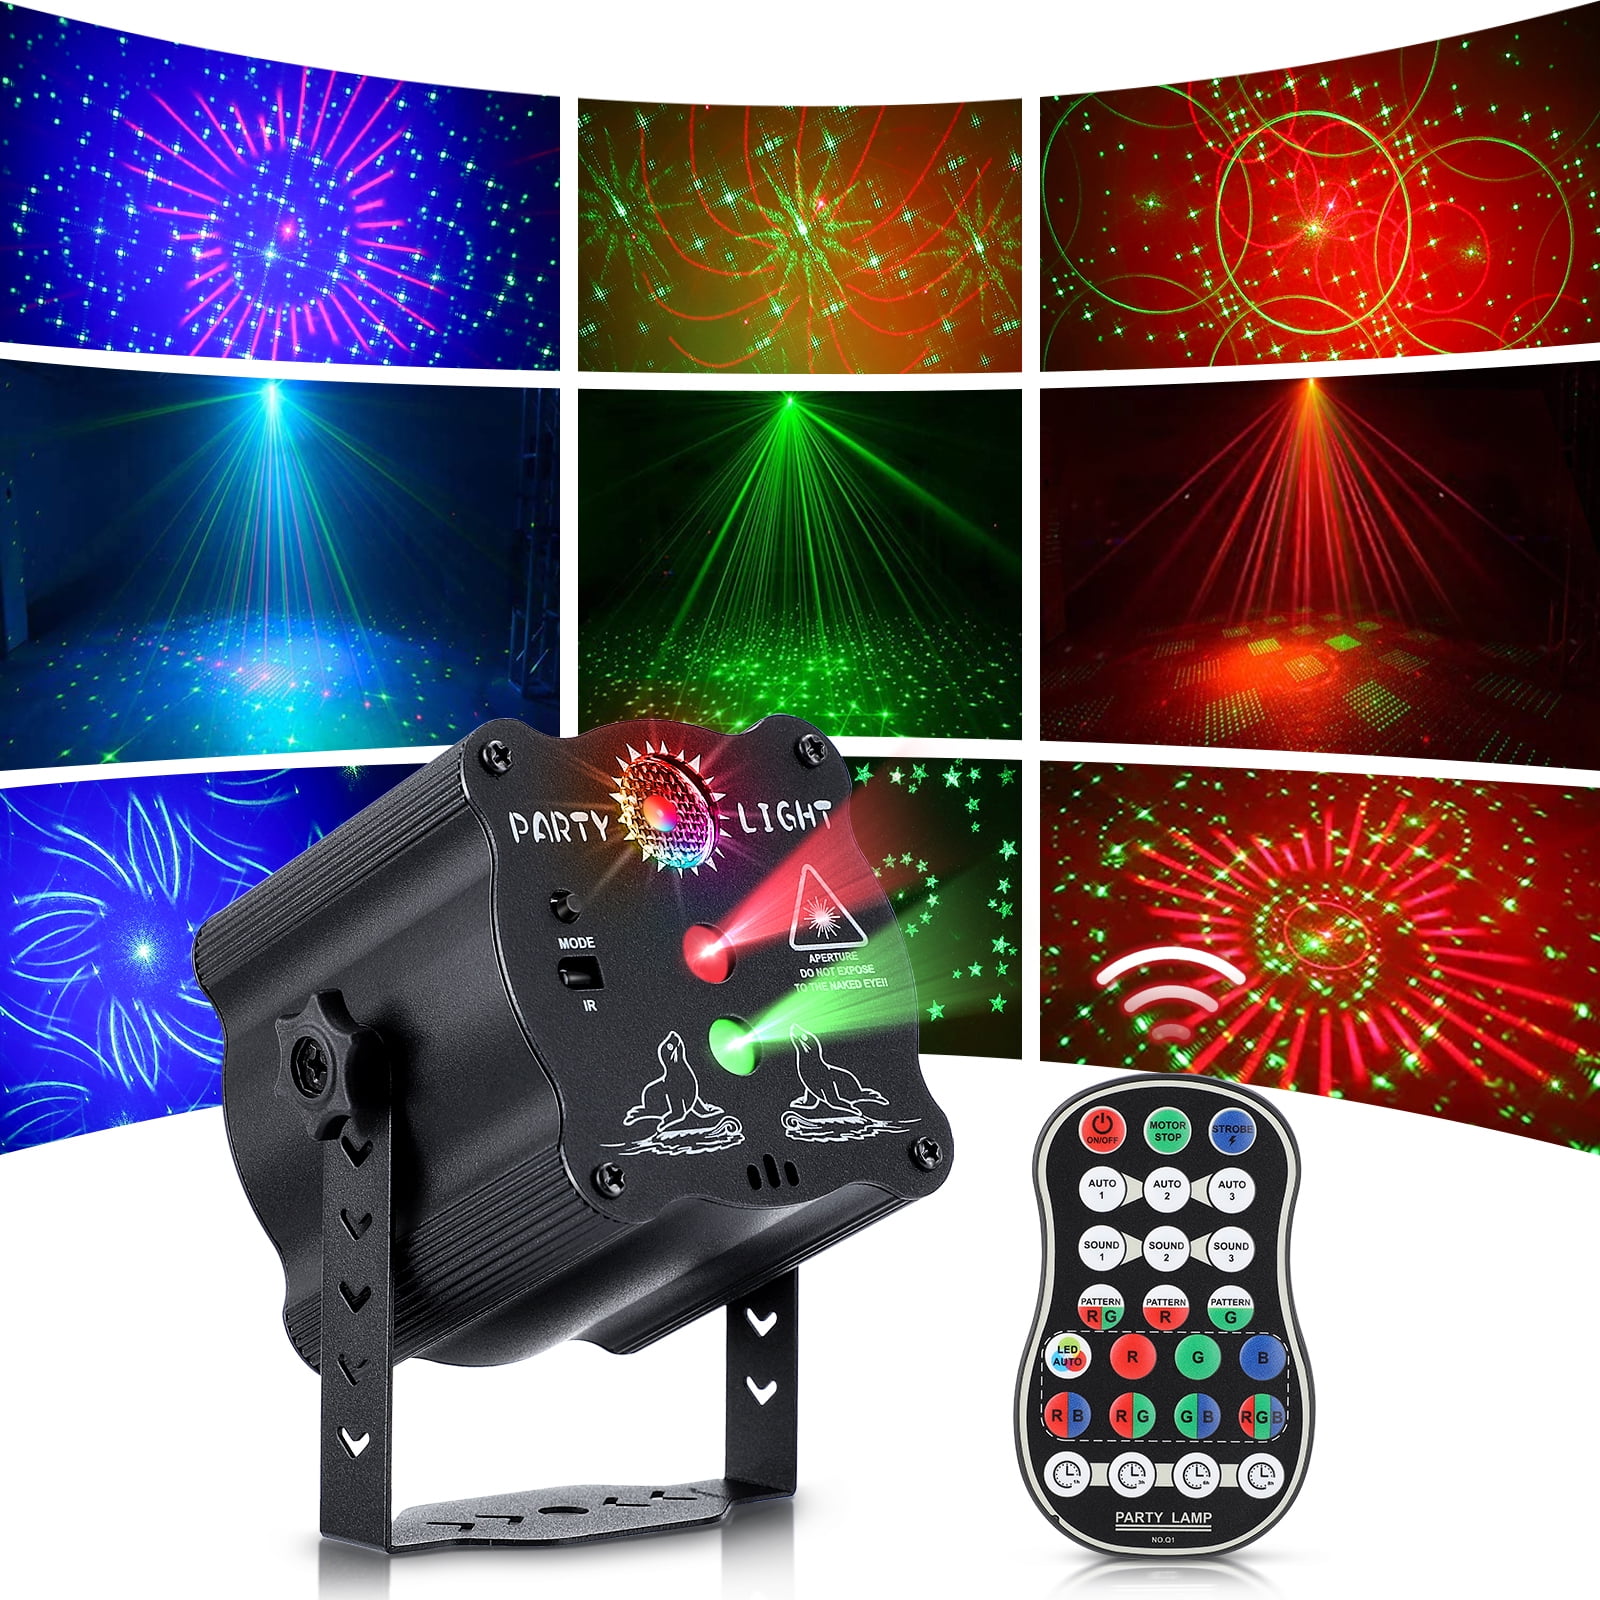 Buy 5PCS LED Finger Lights Beams Flashing Light Up Party Favors Lamp Dance  Disco Show at affordable prices — free shipping, real reviews with photos —  Joom